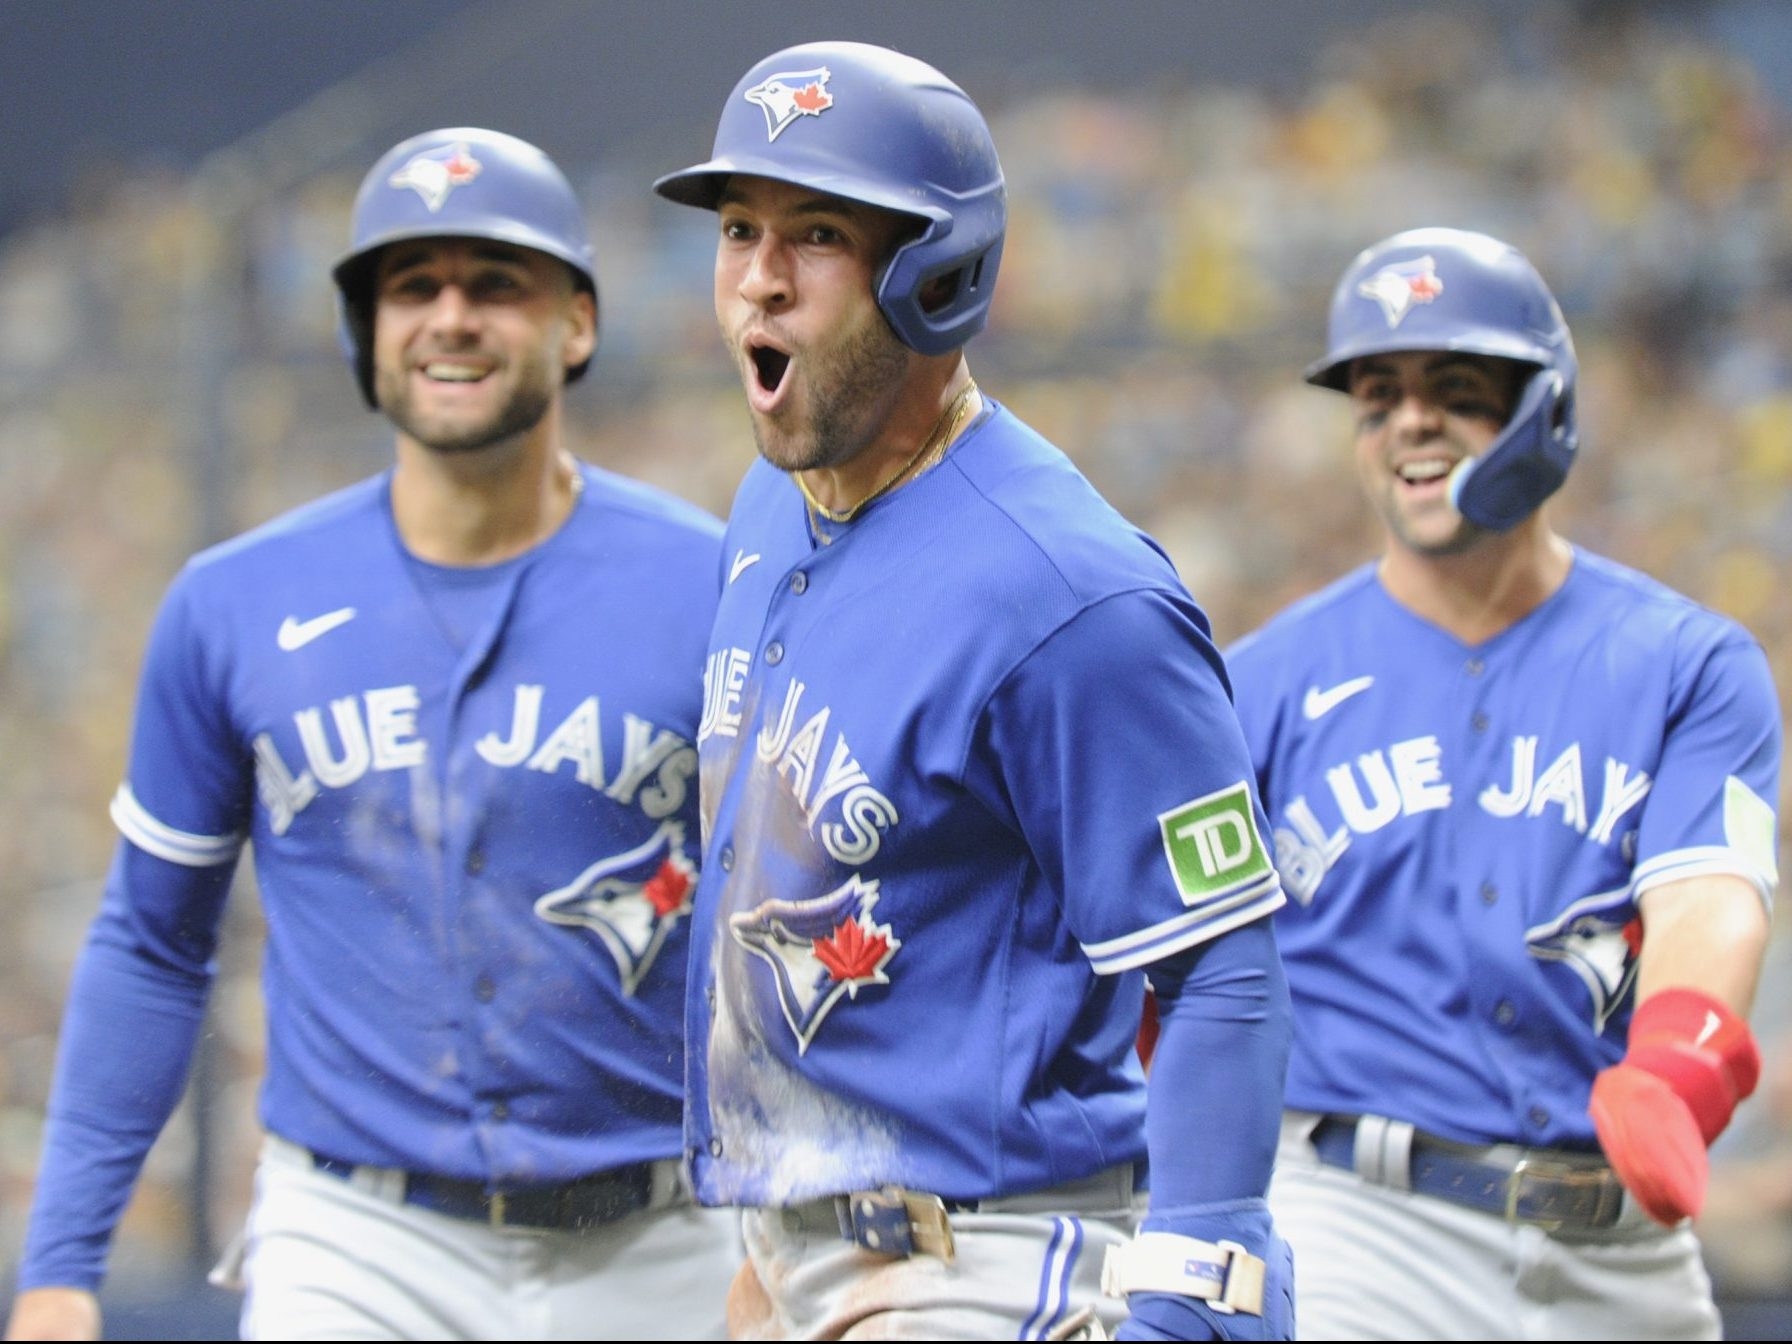 After season of inconsistency, Blue Jays heating up at perfect